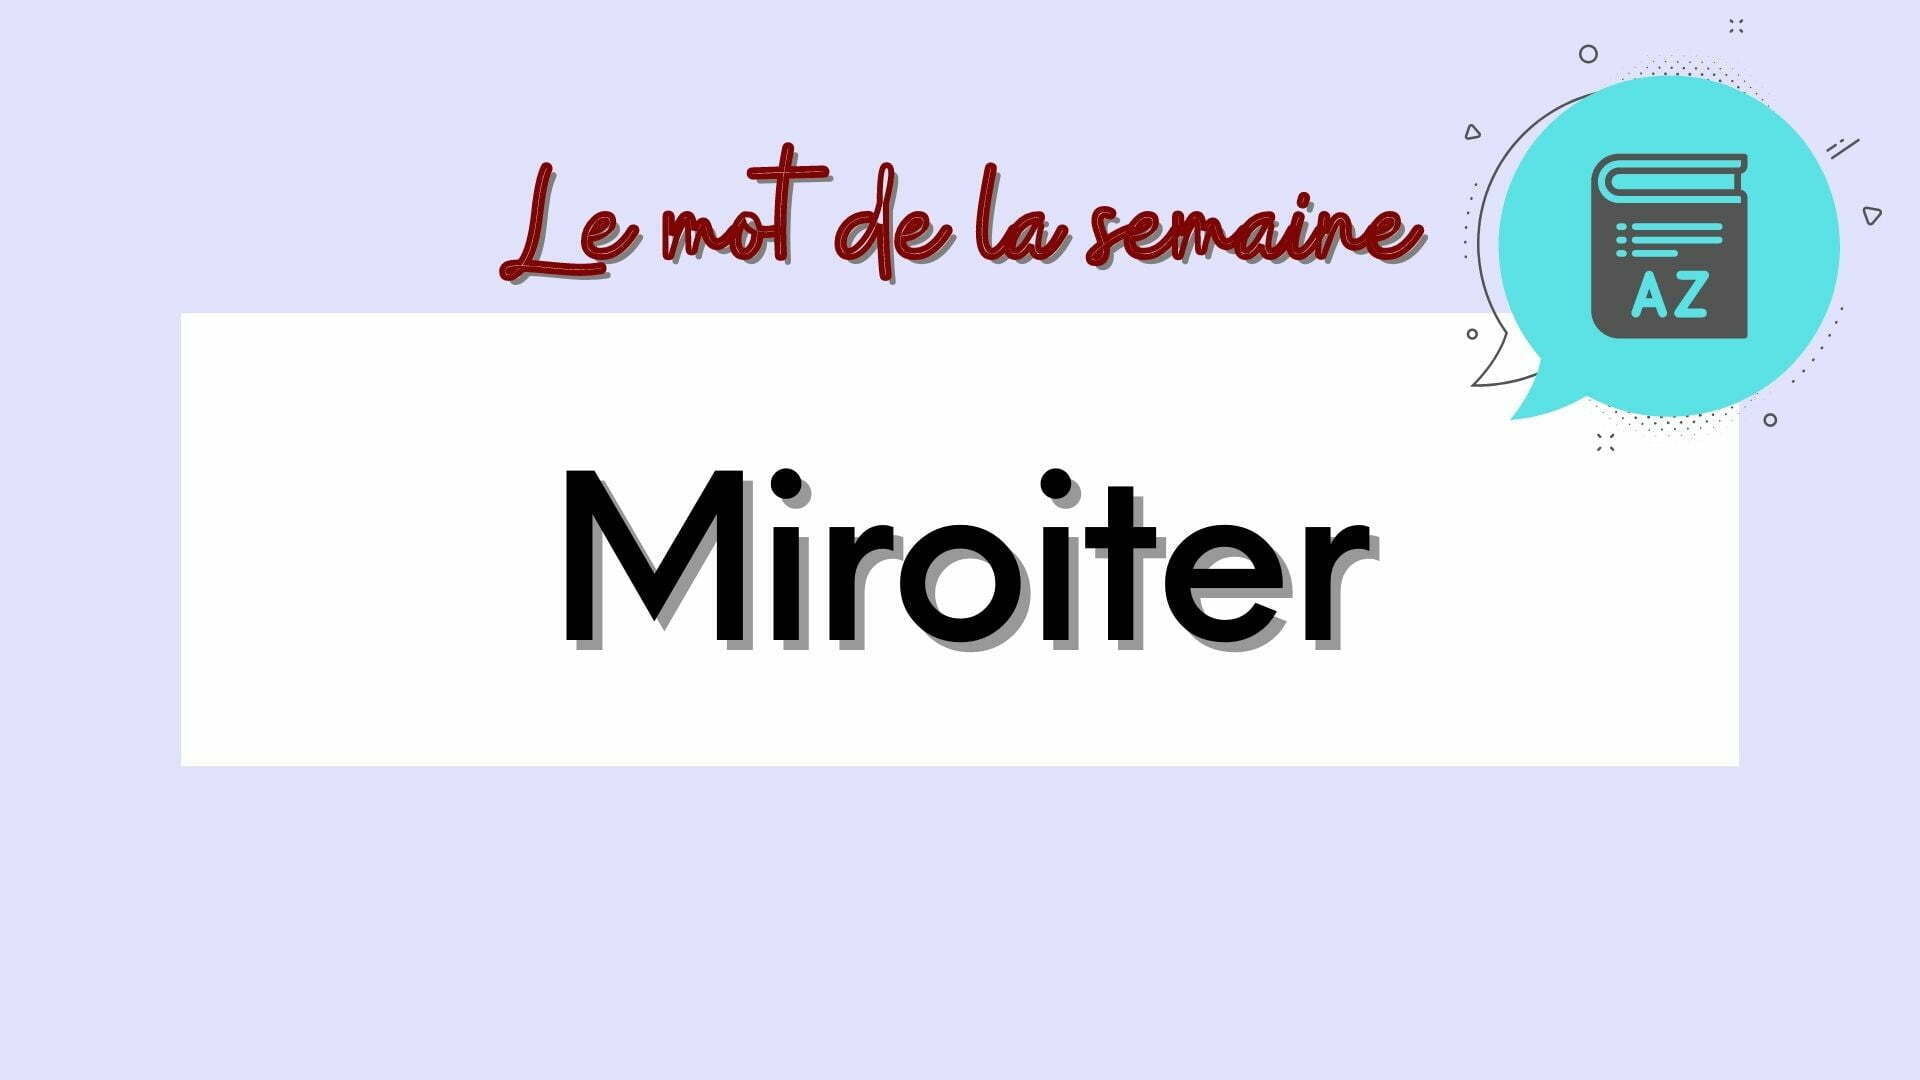 miroiter in french